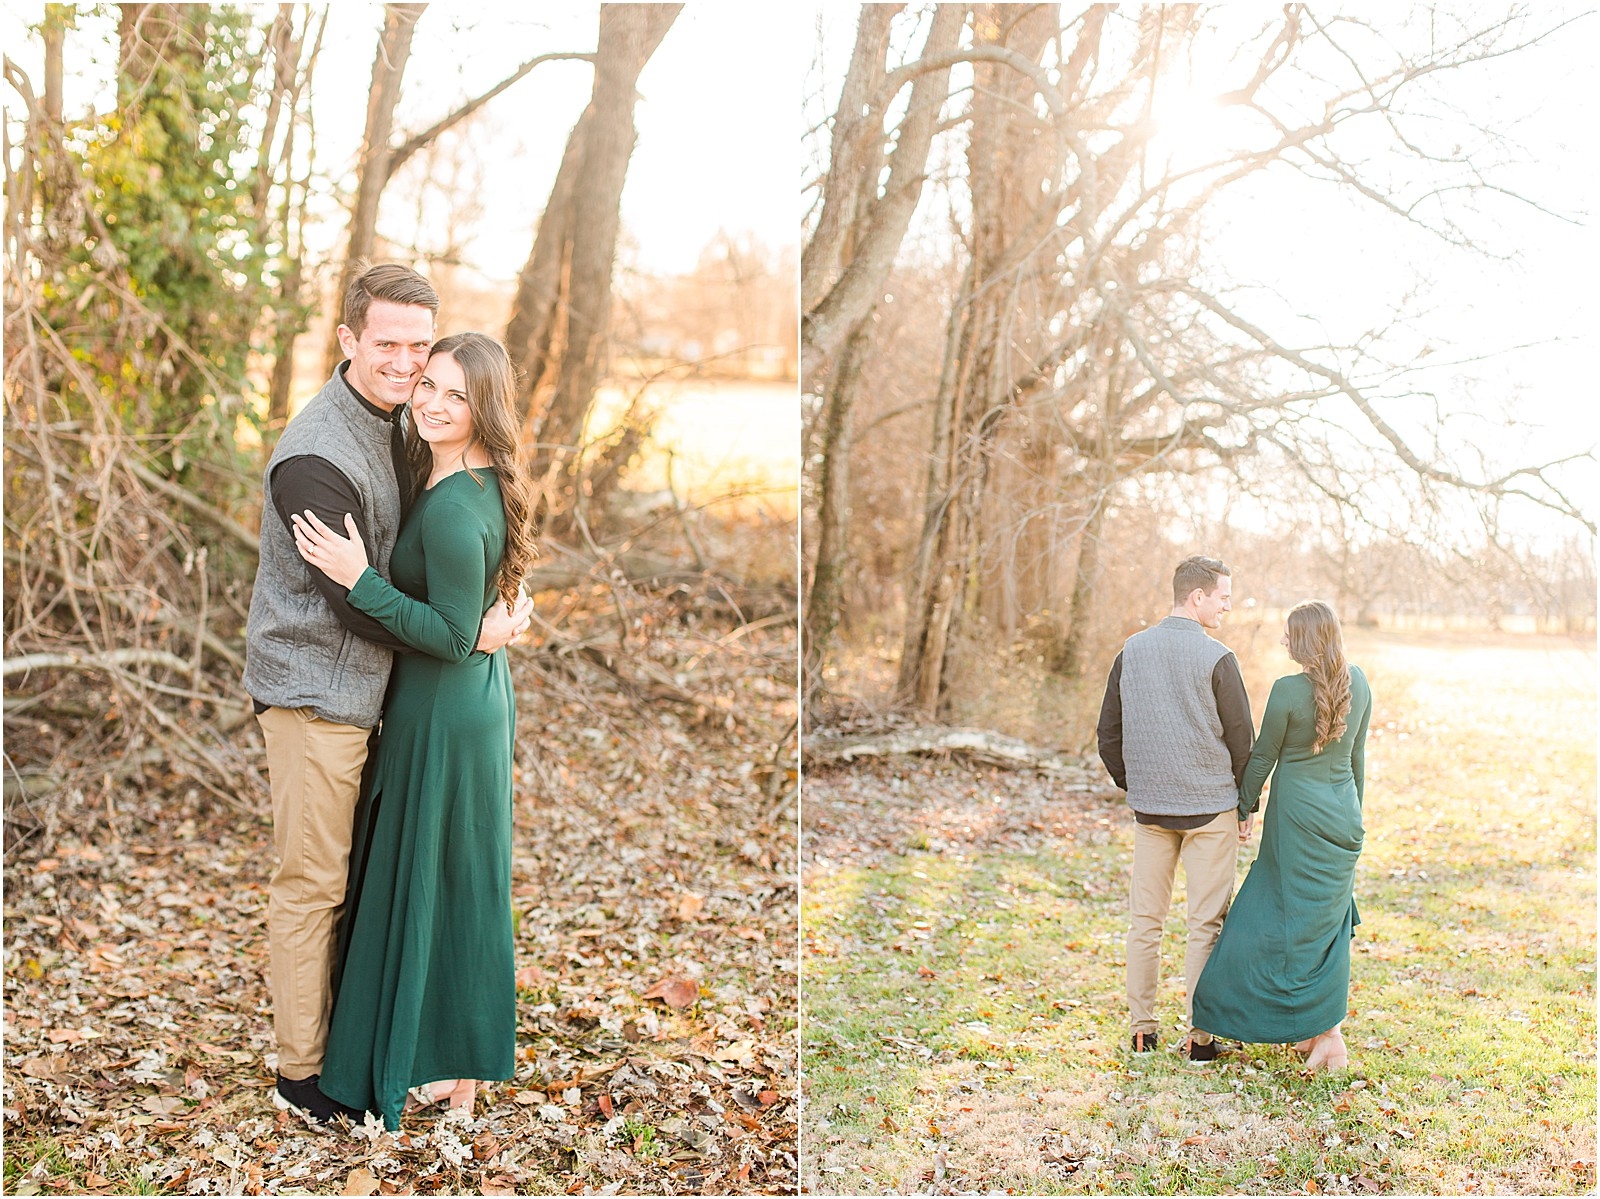 Kaley and Devon's fall Evansville Indiana engagement session. | #fallengagementsession #evansvilleindiana #evansvilleindianawedding | 0009.jpg